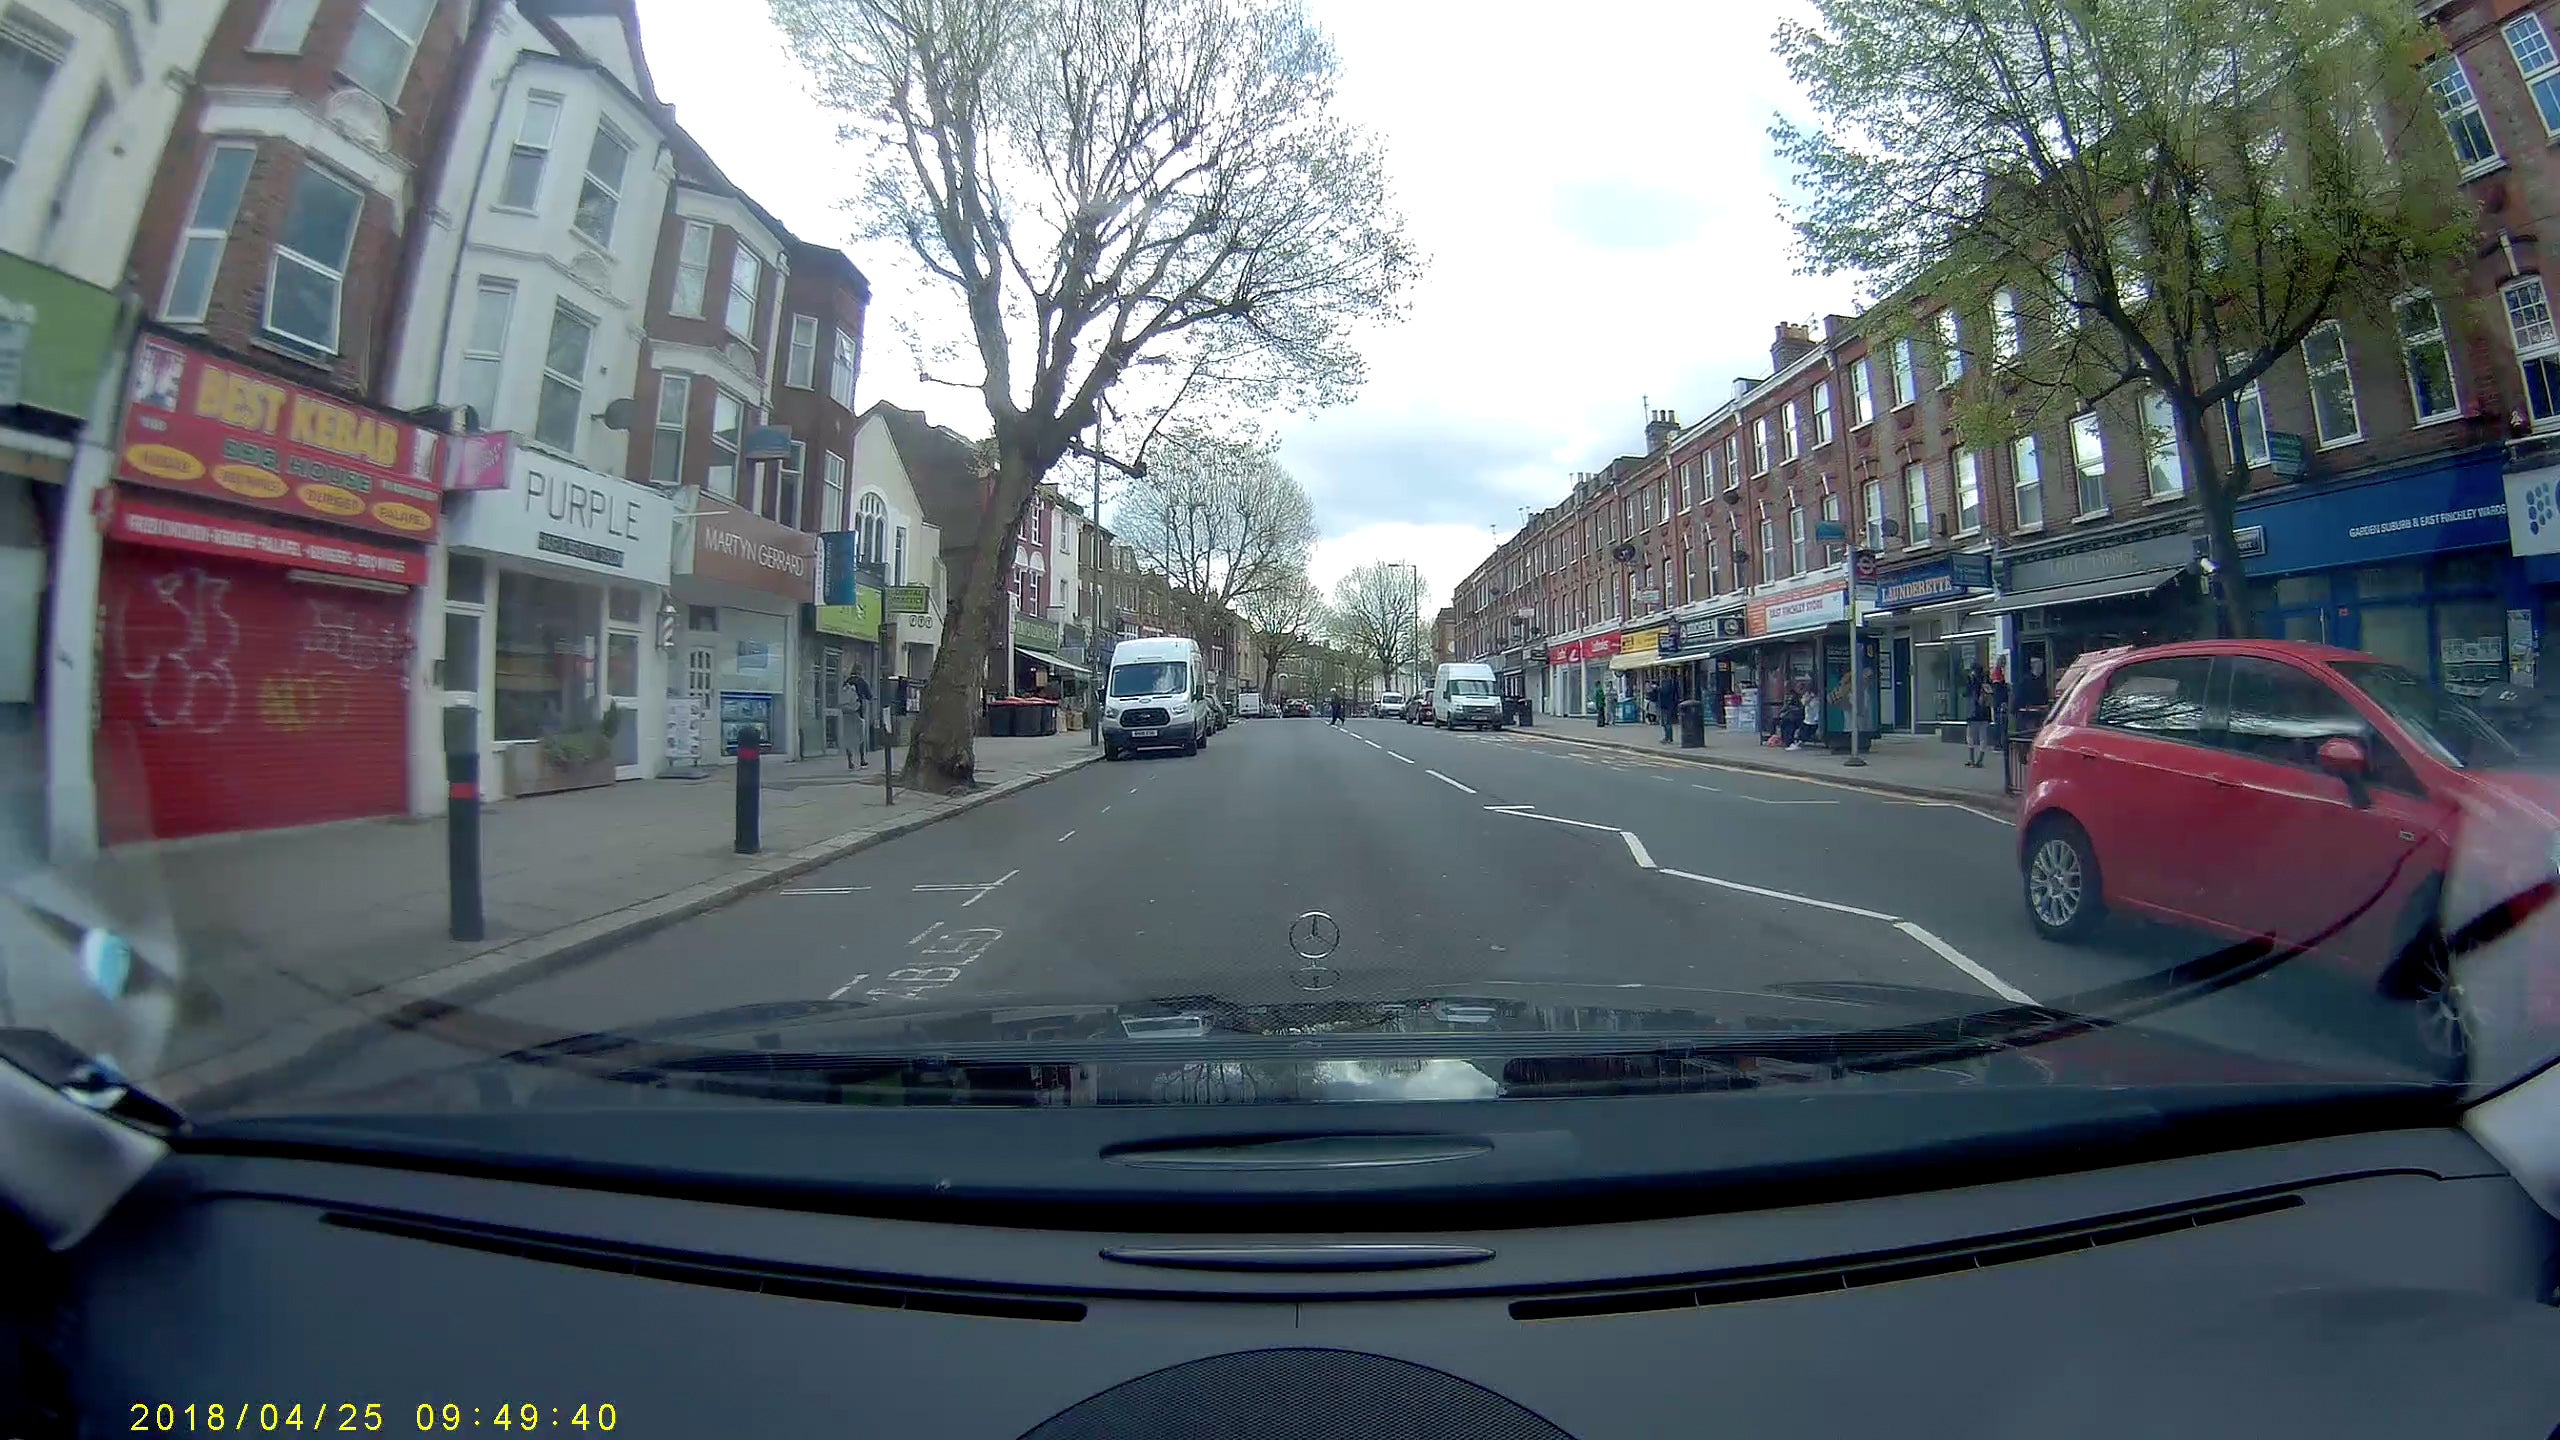 Dashboard camera view of a street scene with vehicles.